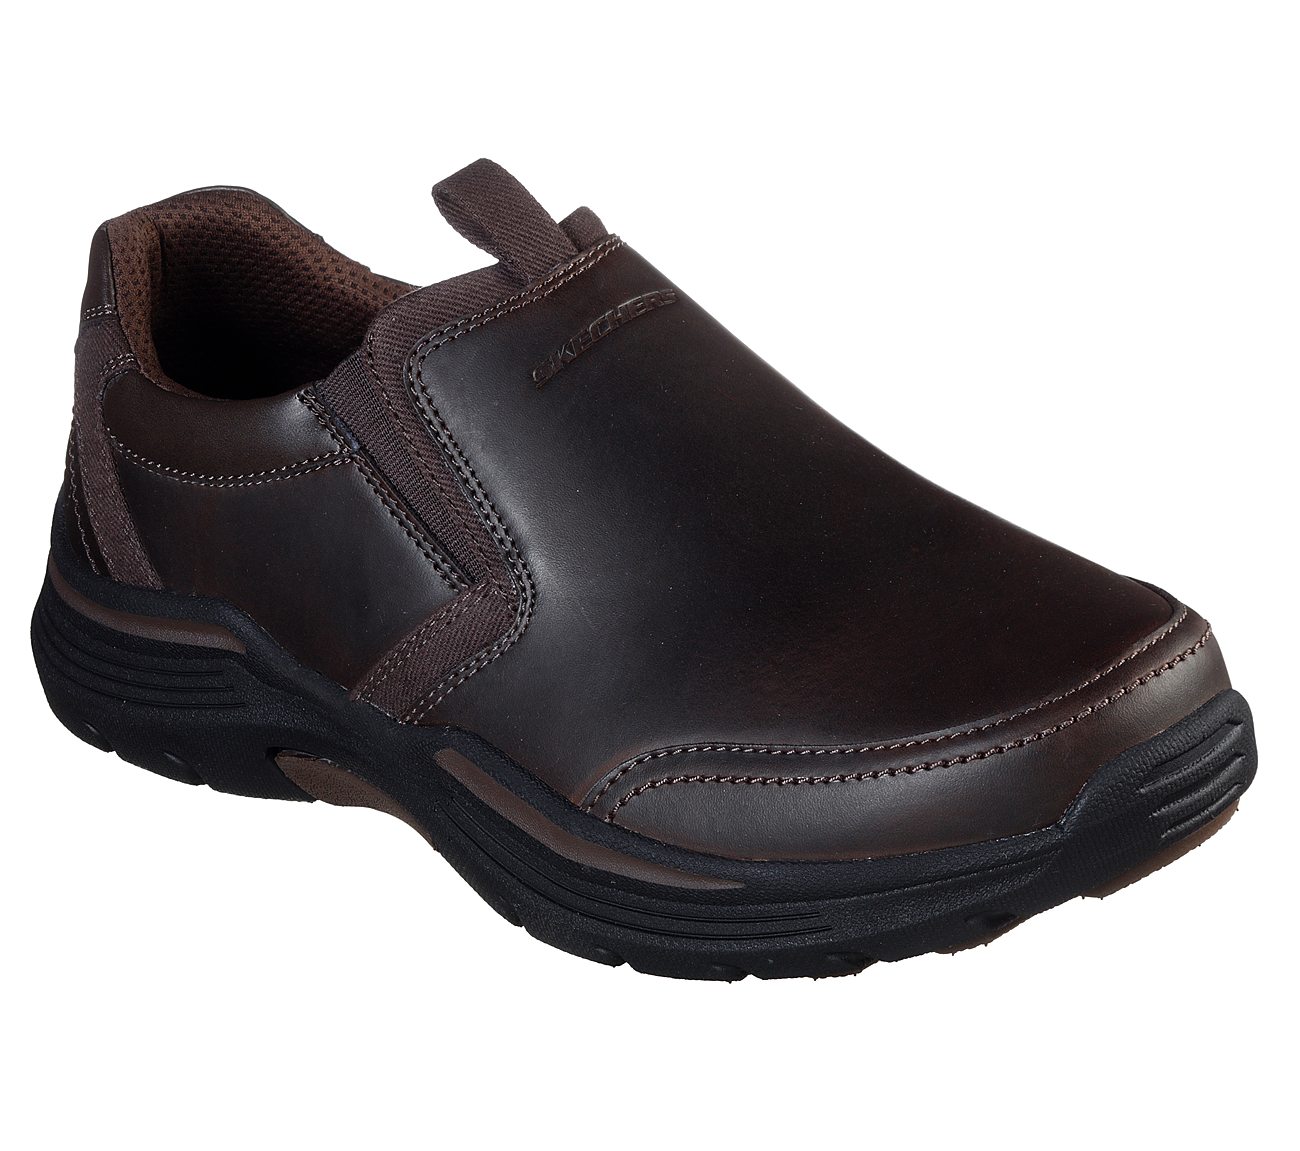 skechers gains relaxed fit slip on shoes